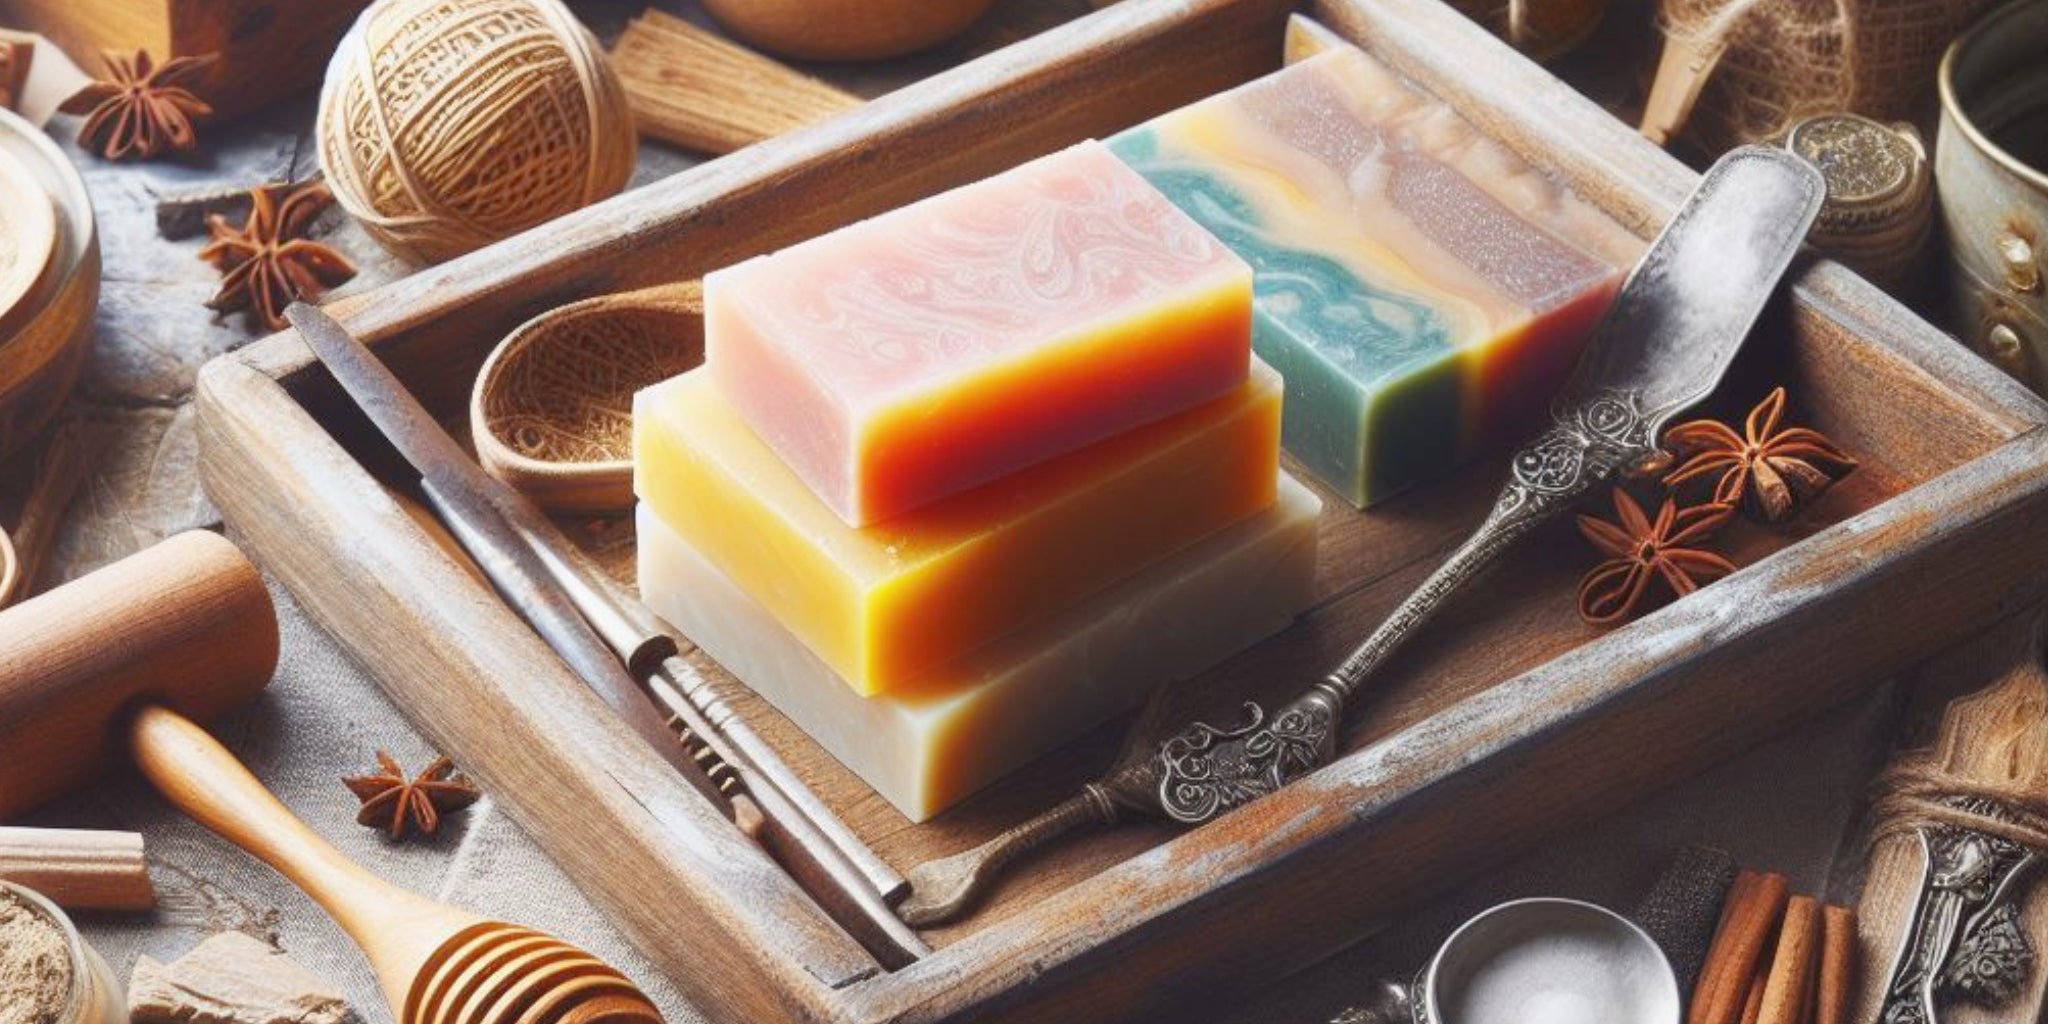 Handcrafted artisan soap stack, showcasing a variety of freshly made, luxurious soap